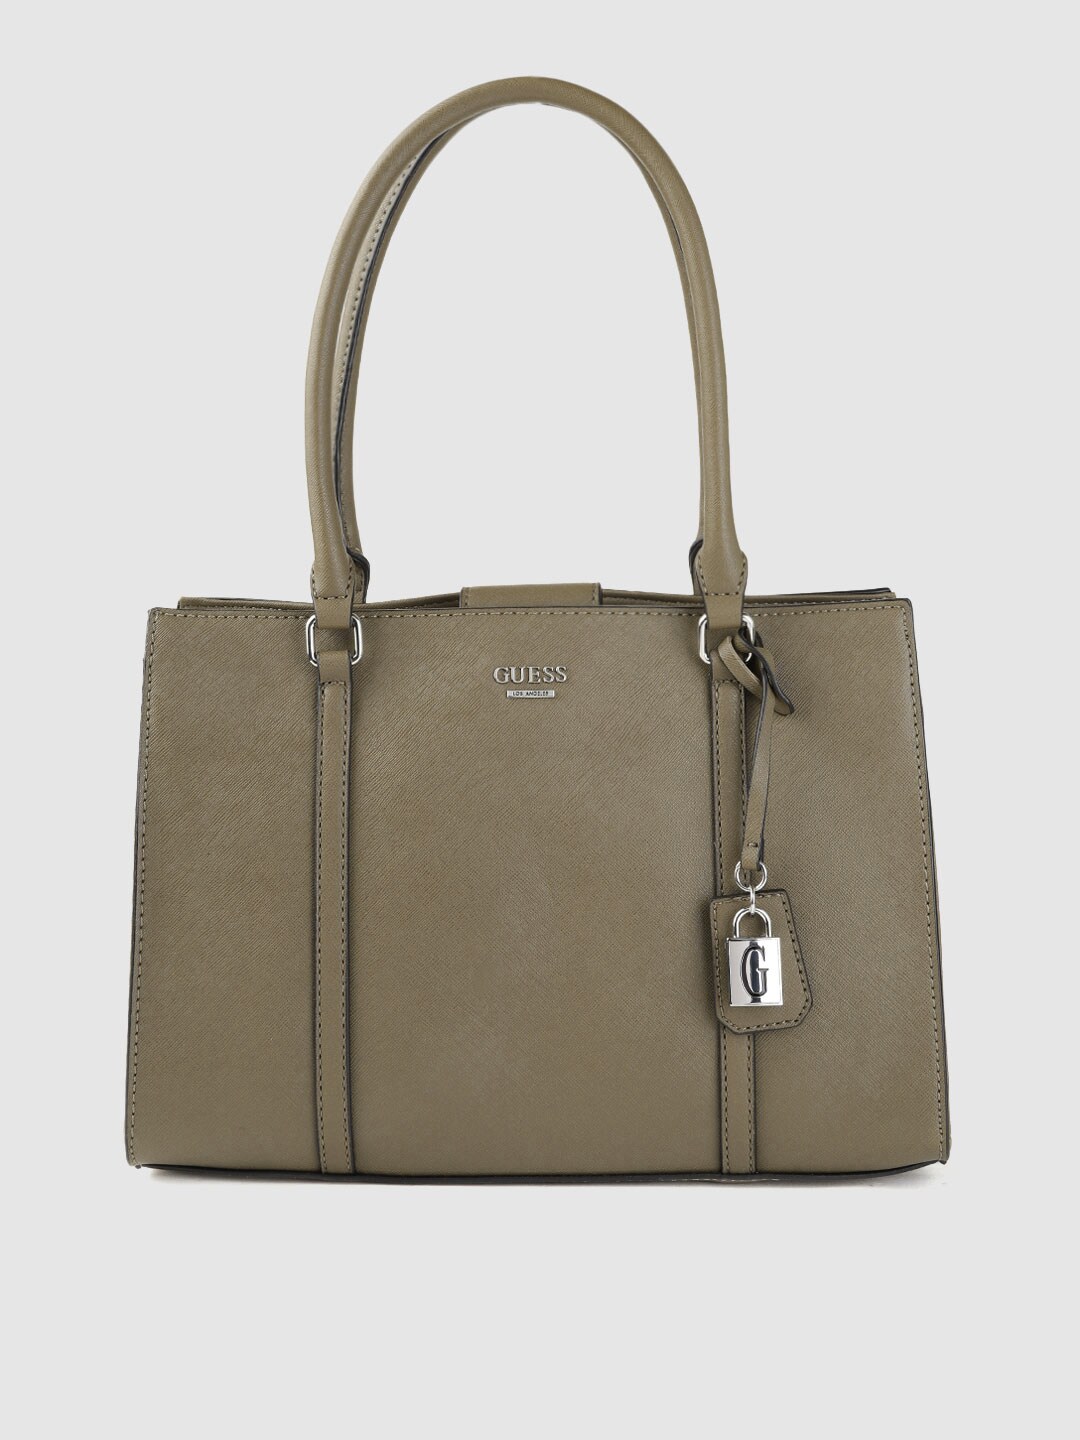 GUESS Women Olive Green Textured Structured Shoulder Bag Price in India